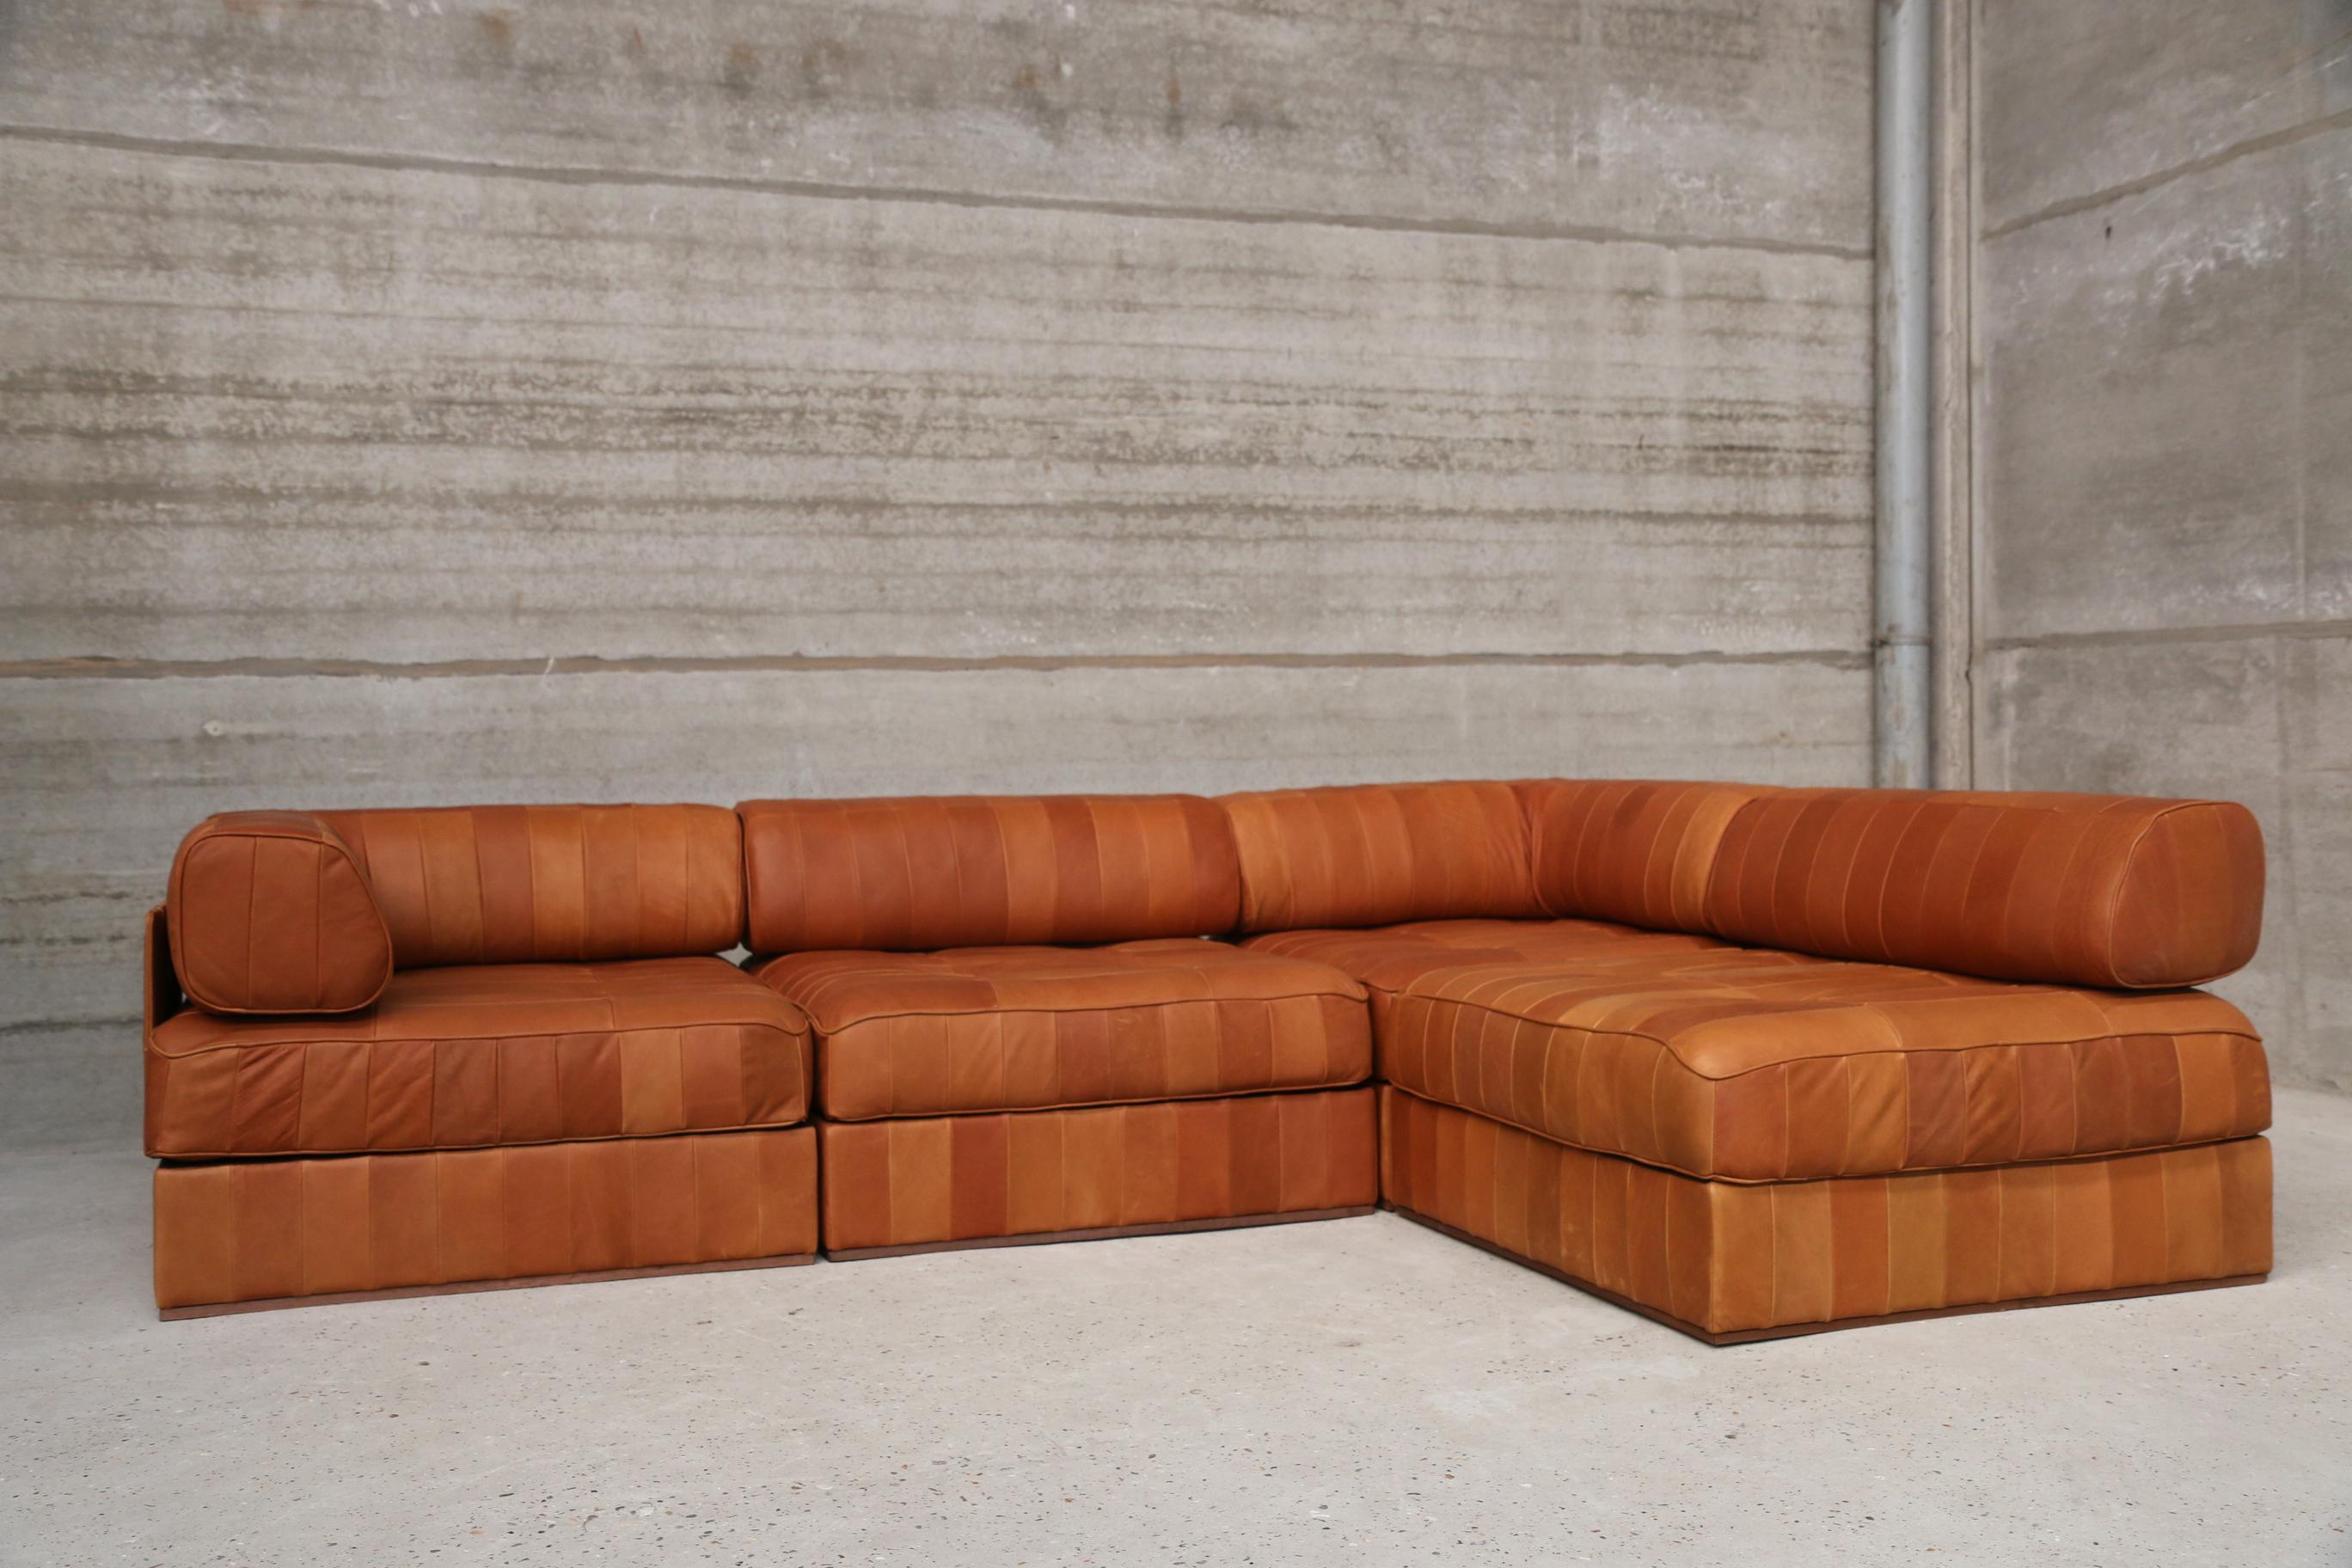 Iconic DS88 modular patchwork sofa restored in our signature vintage aniline leather. New quality foam and new leather. You can play with the modular composition of the sofa. This set consists of 4 modules, 2 normal modules and 2 corner L